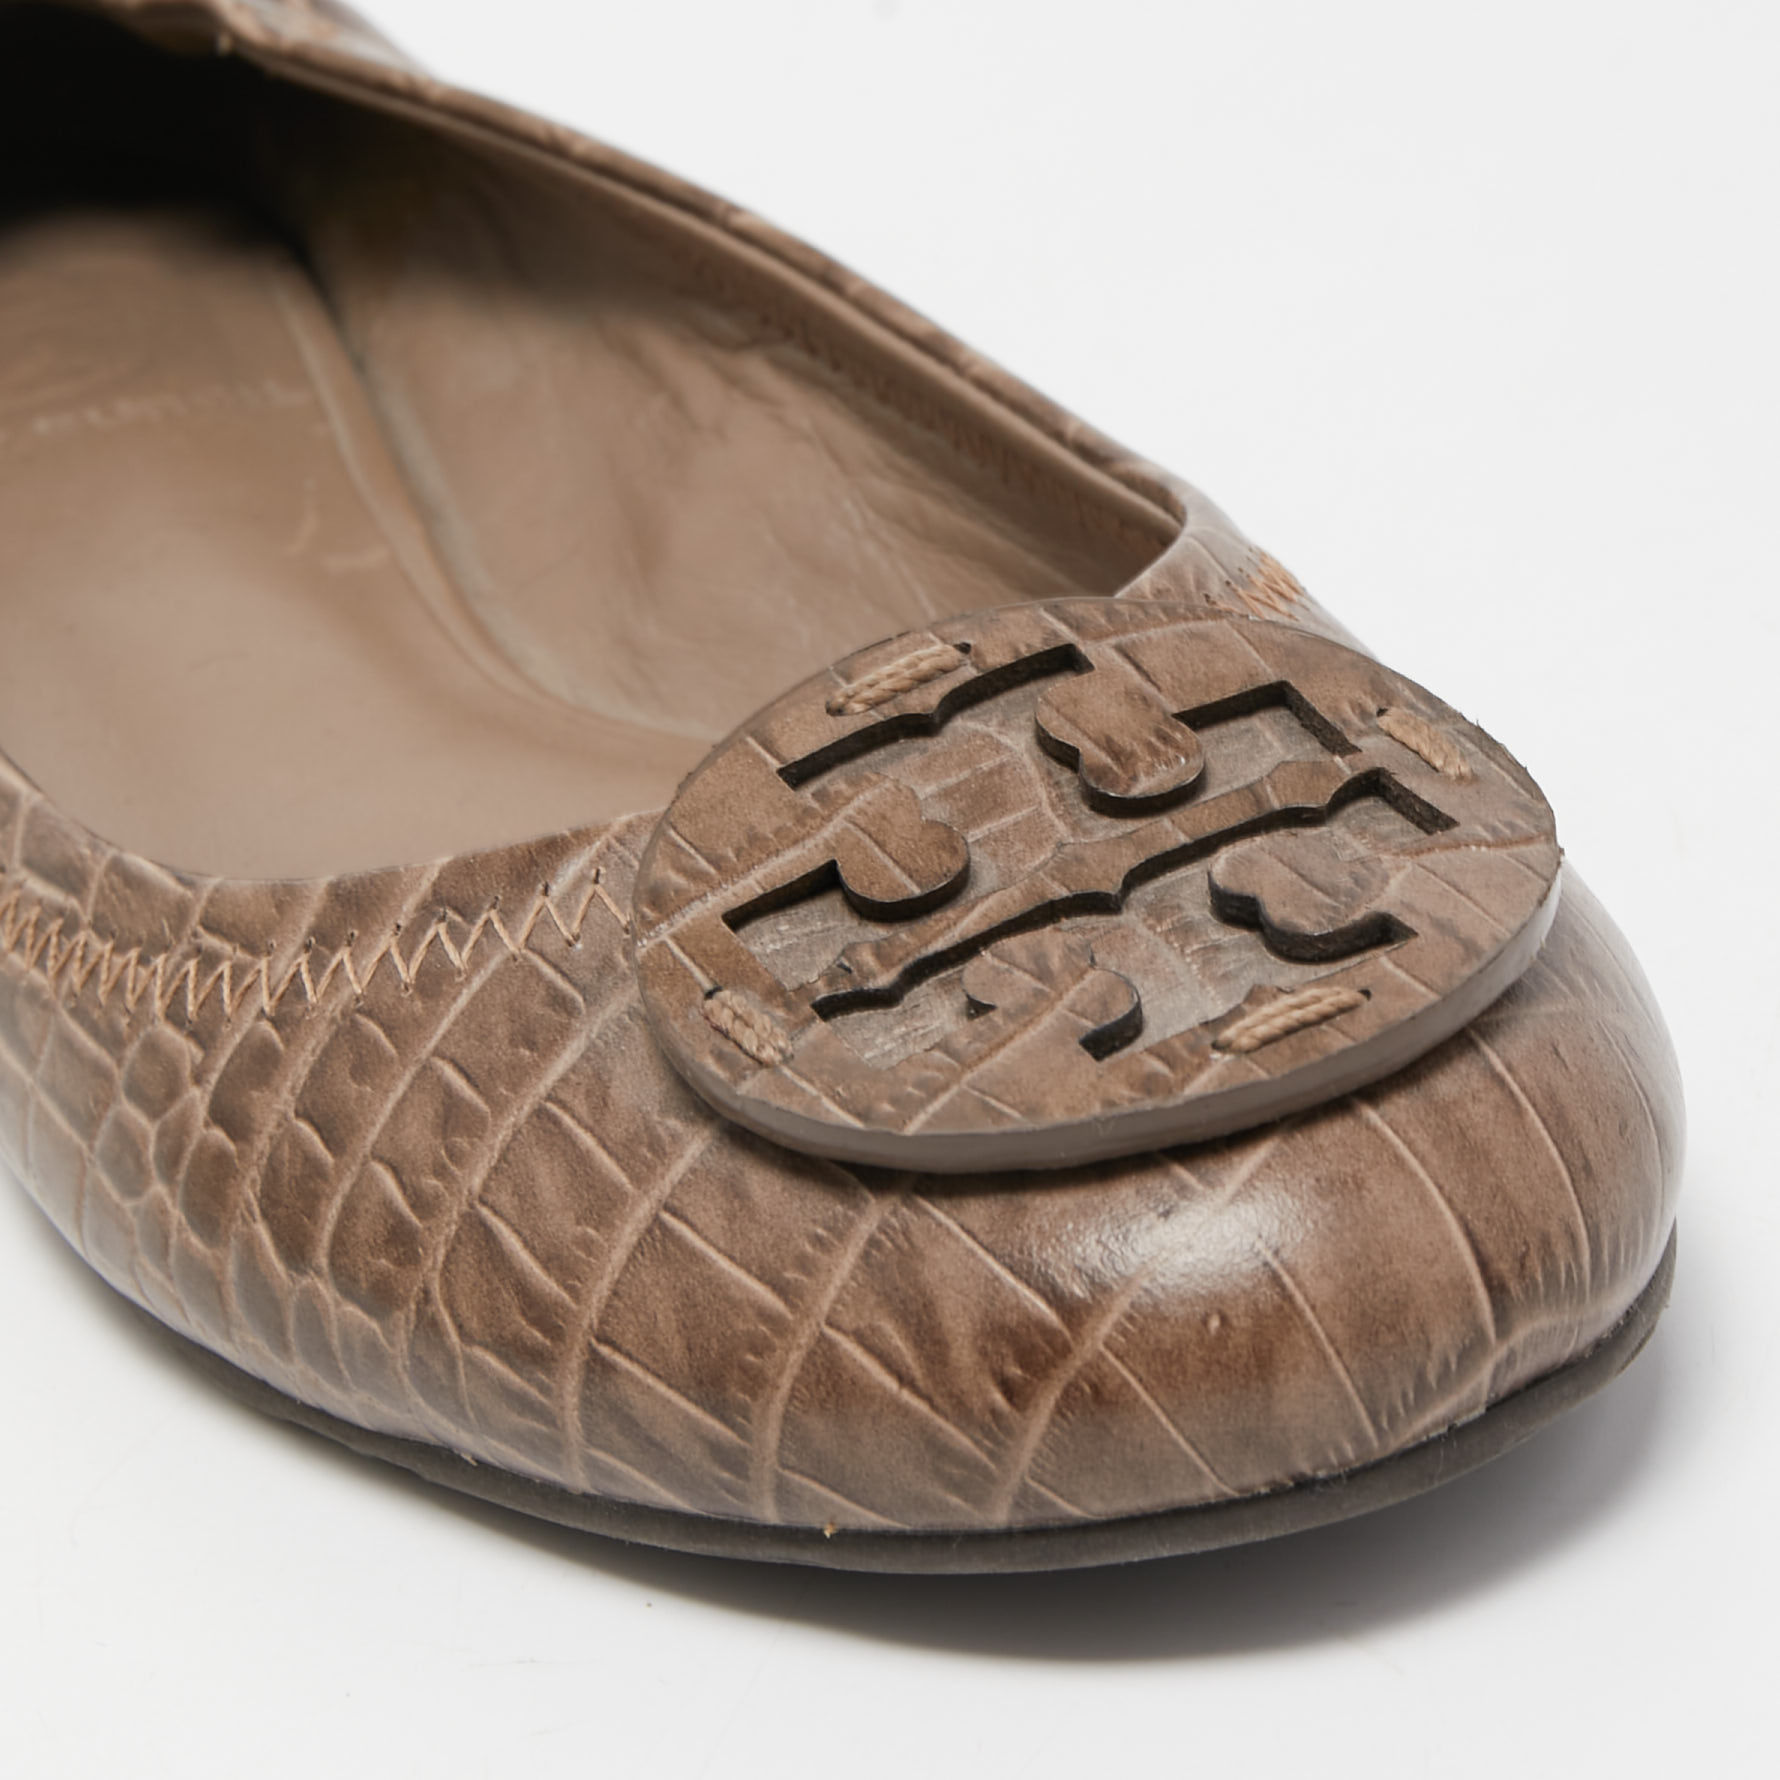 Tory Burch Brown Croc Embossed Leather Reva Ballet Flats Size 37